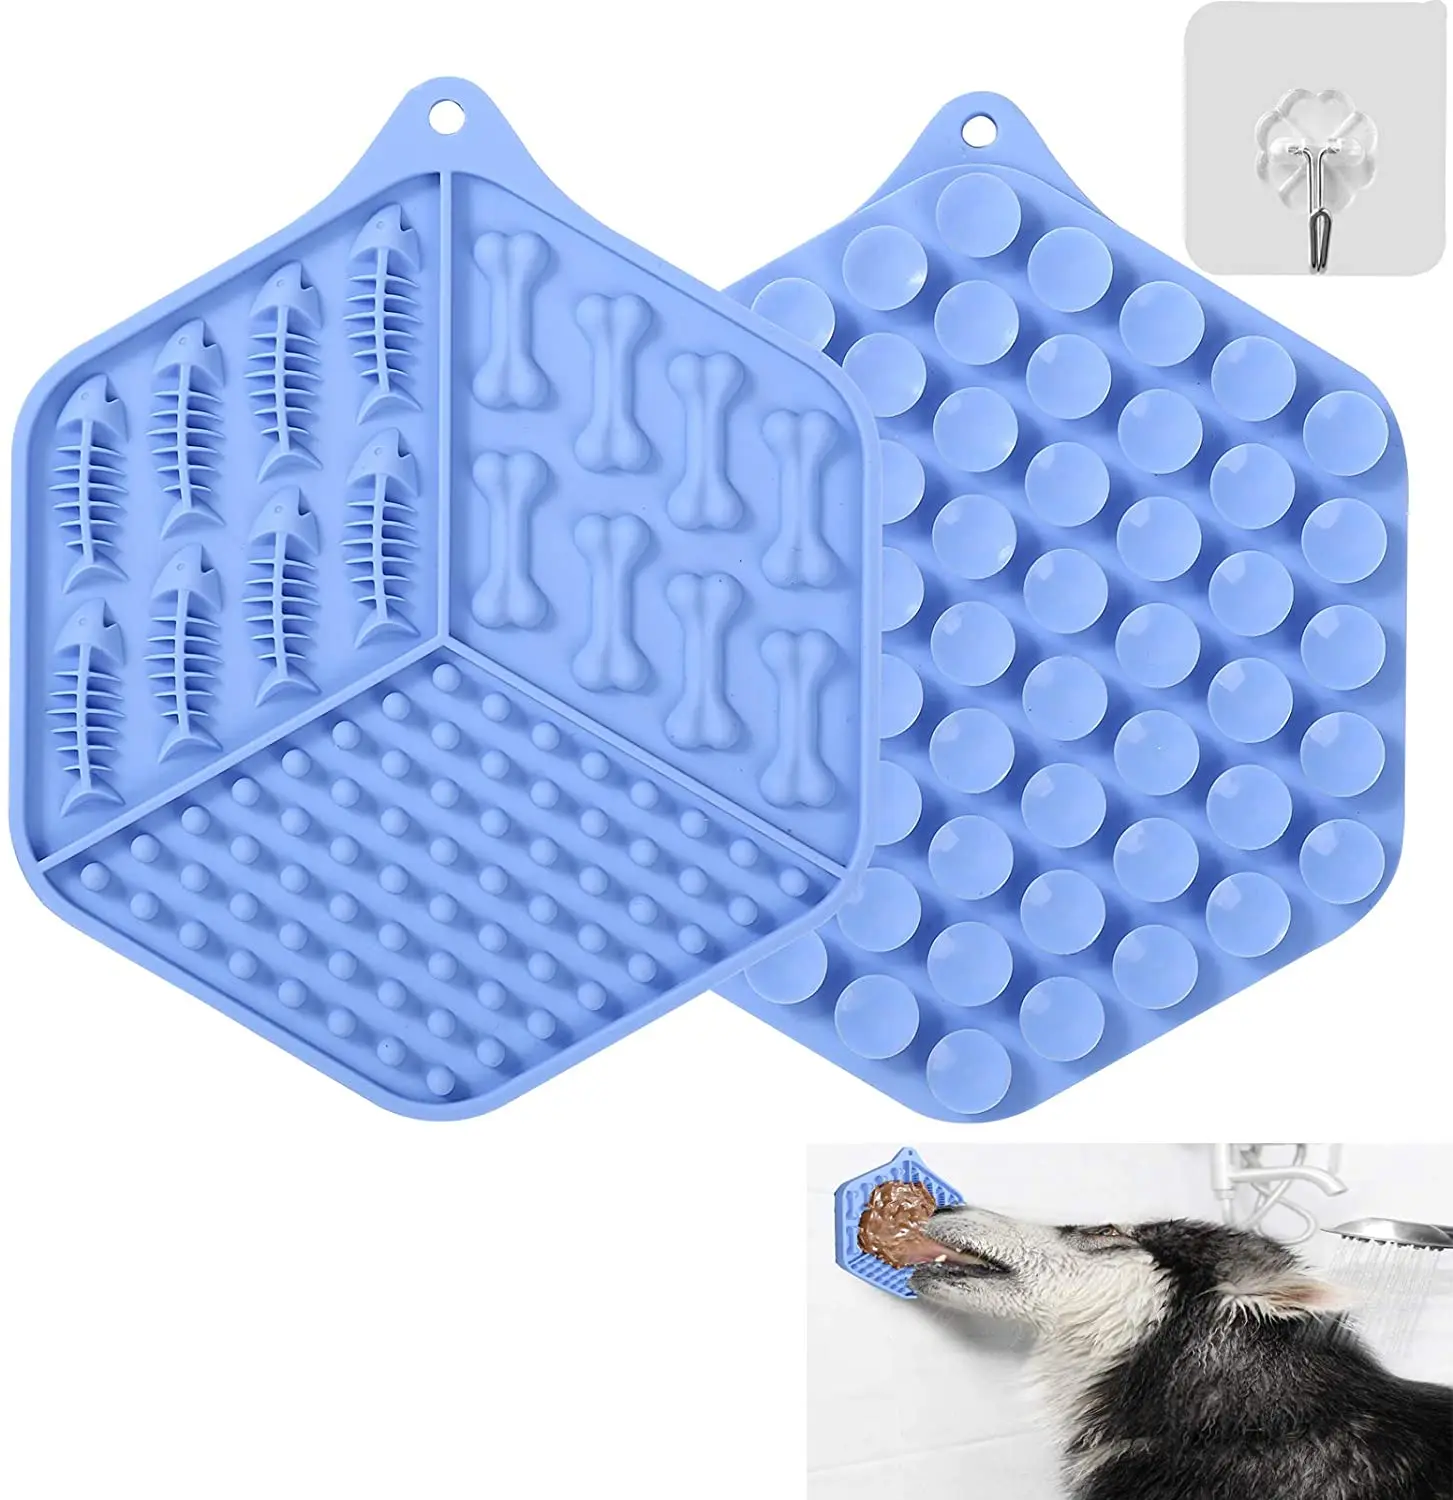 

Hecion Slow Feeder Large Pet Food Plates Grooming Mat Dog Lick Pad for Pet Food, Treats and Anxiety Reduction